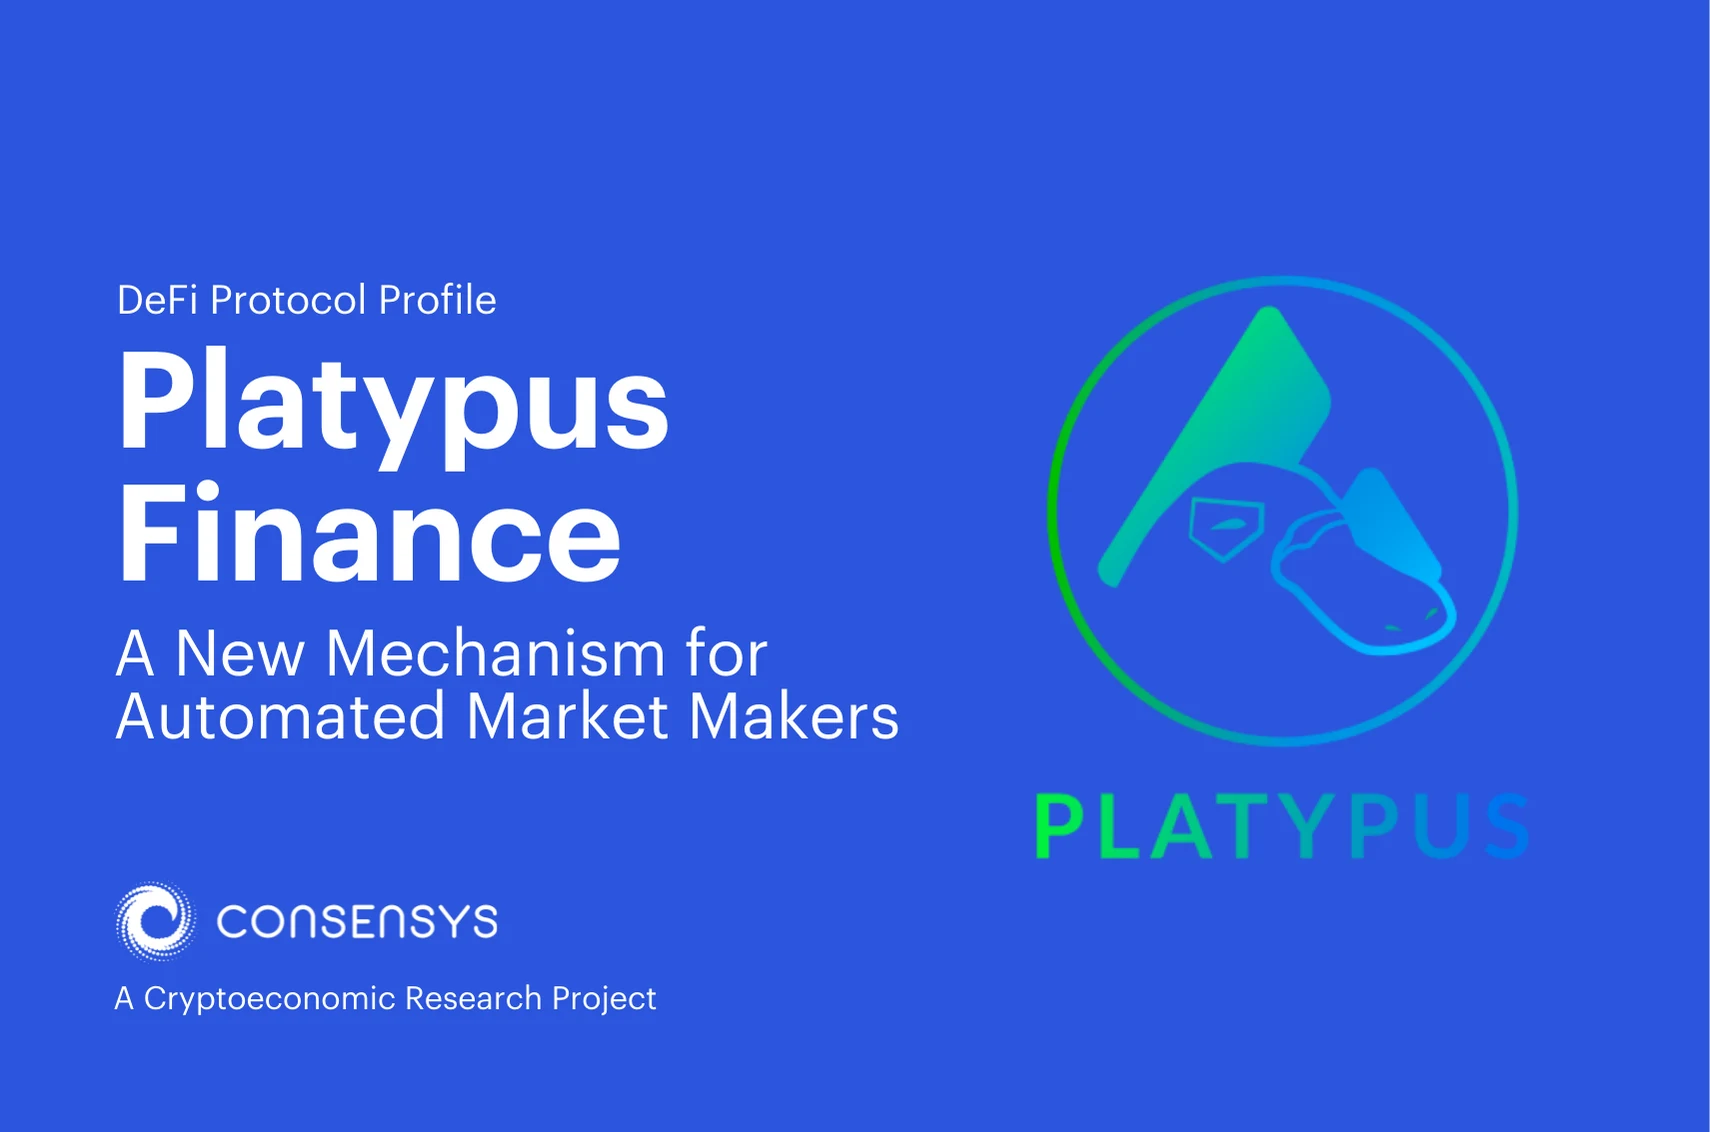 Platypus Finance: A New Mechanism for Automated Market Makers